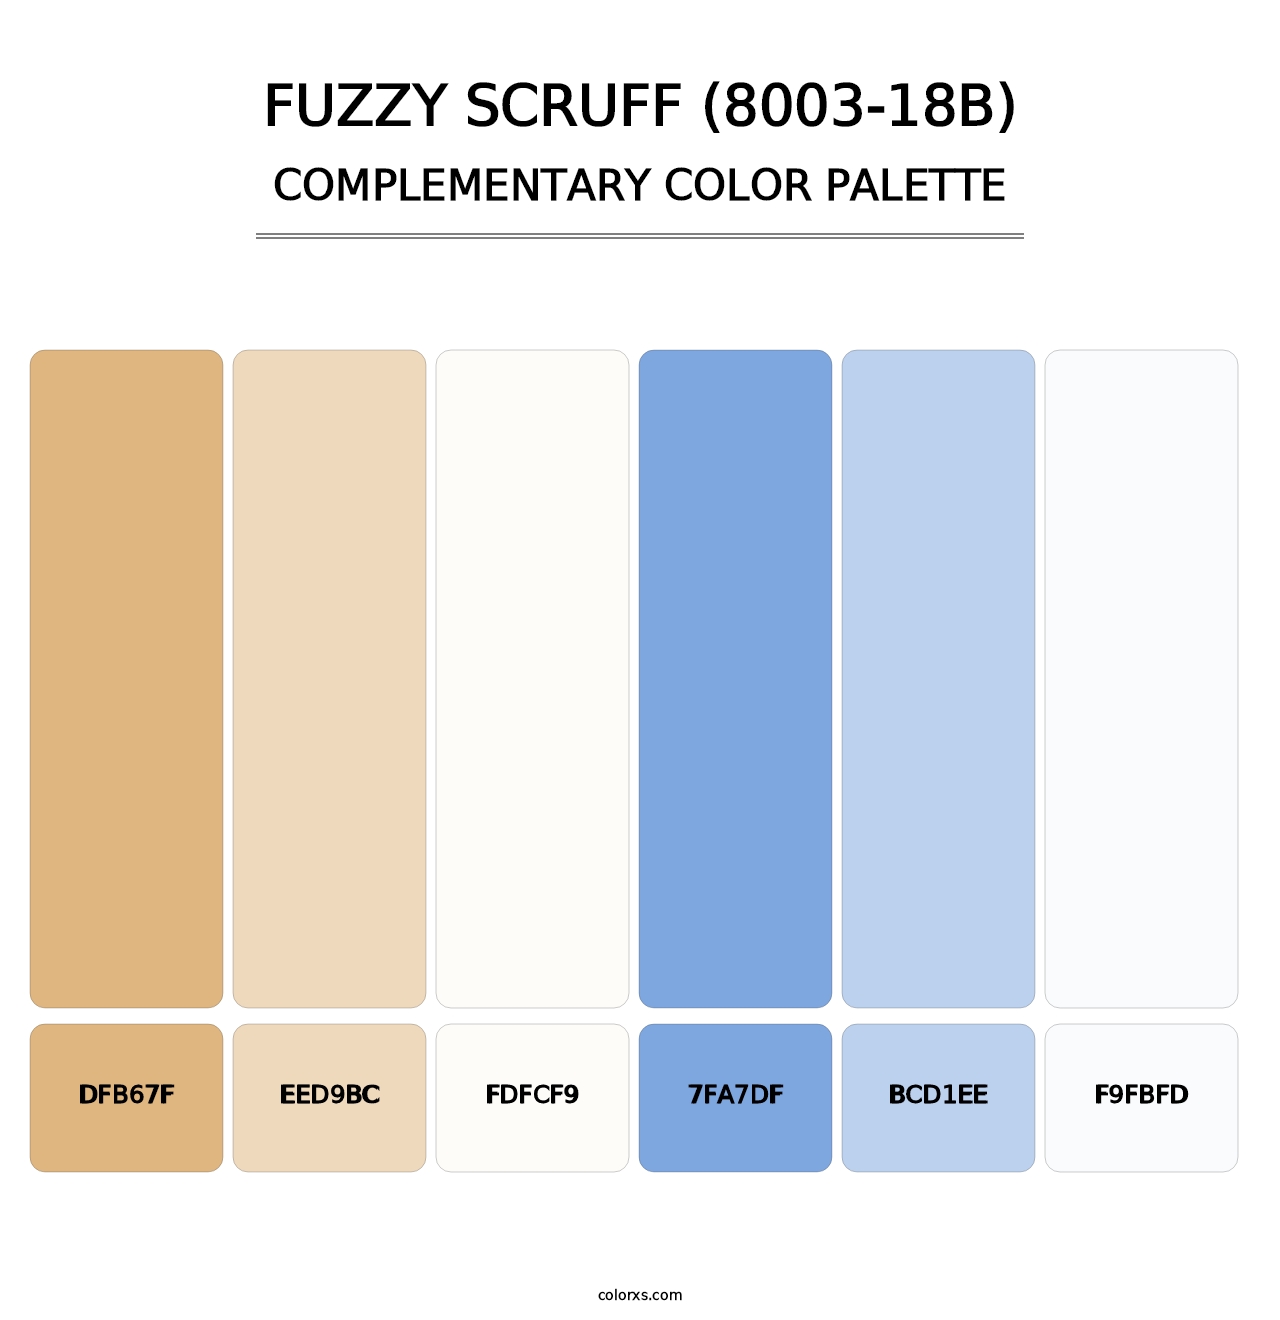 Fuzzy Scruff (8003-18B) - Complementary Color Palette